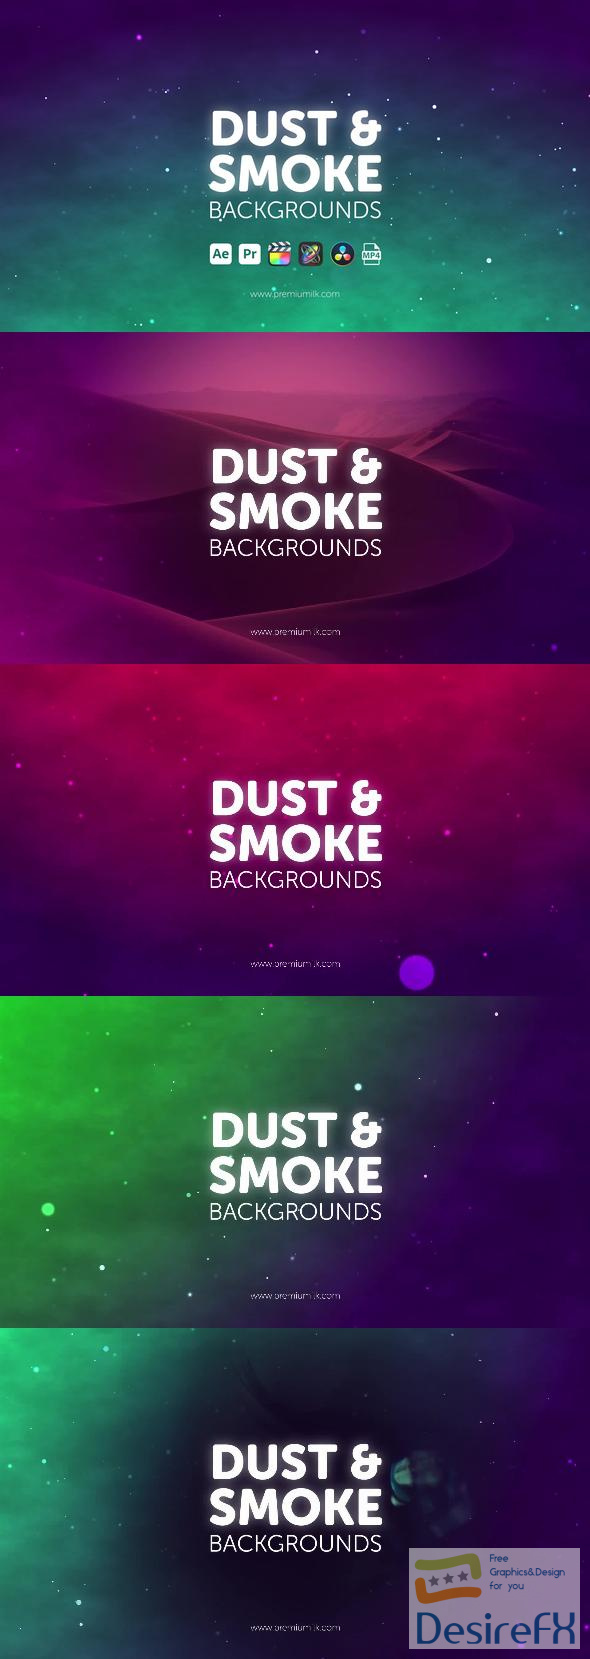 VideoHive Dust & Smoke Backgrounds 45791114